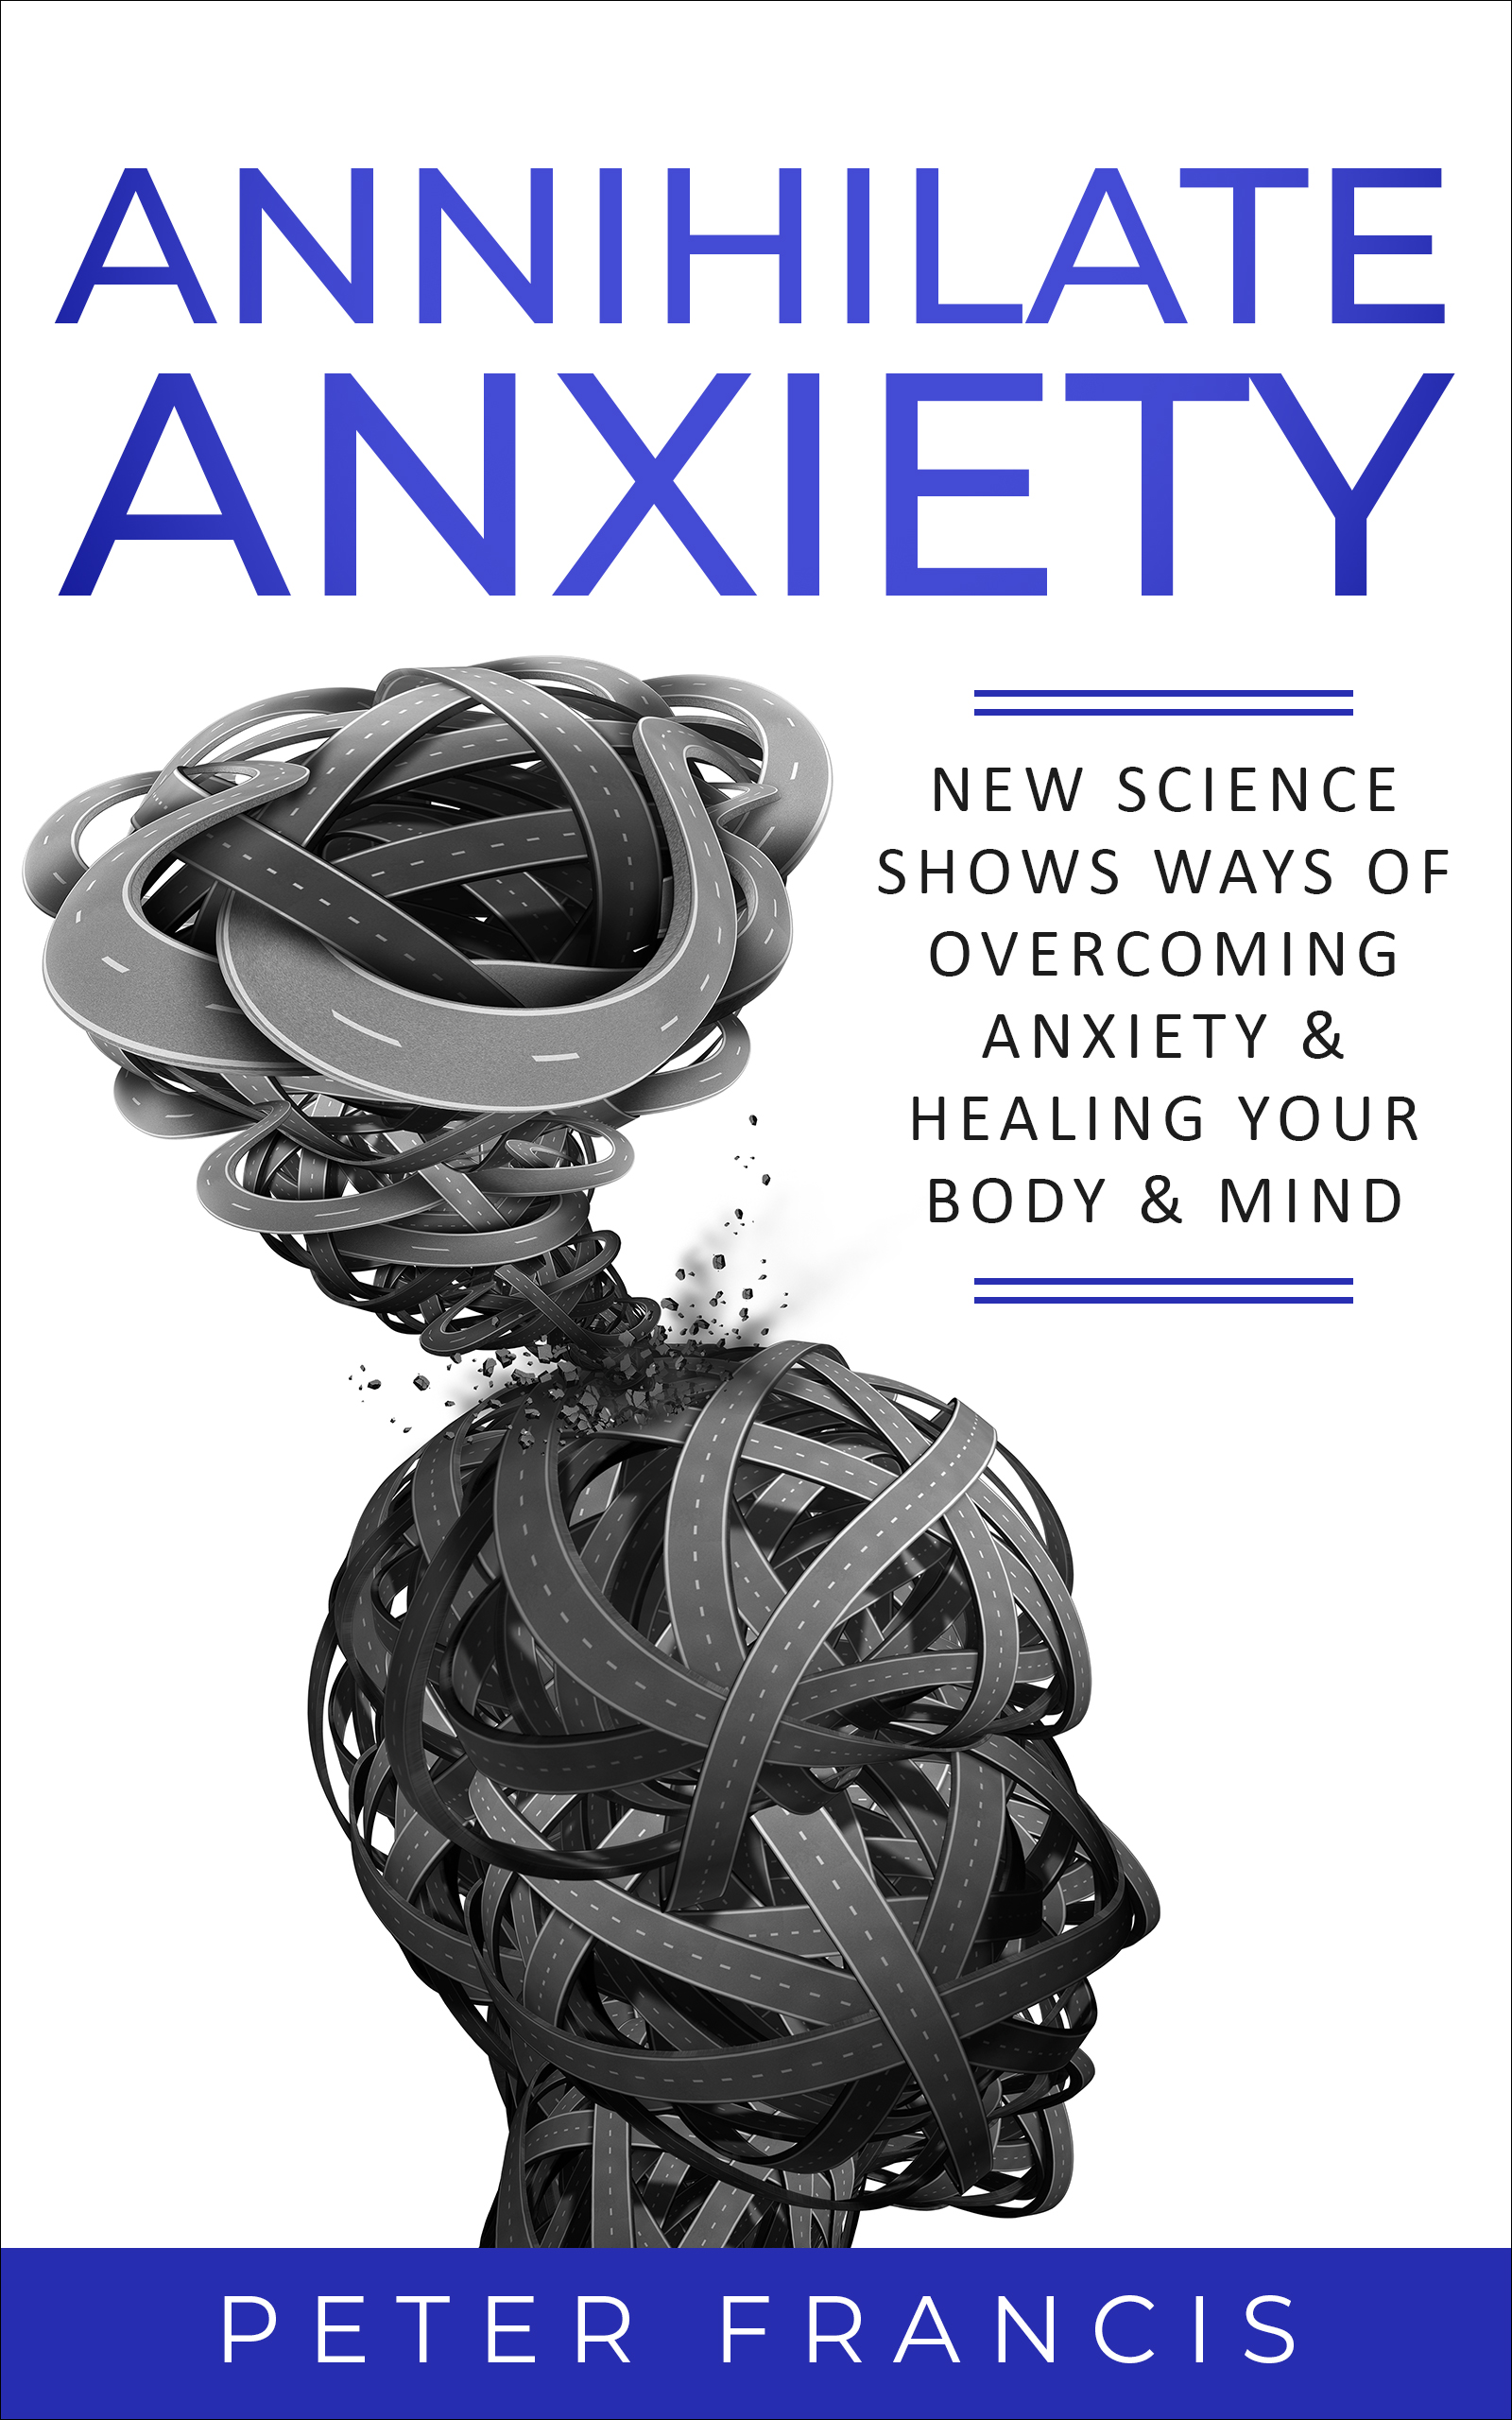 Latest Book Offers Well-Founded Insights into Managing Anxiety